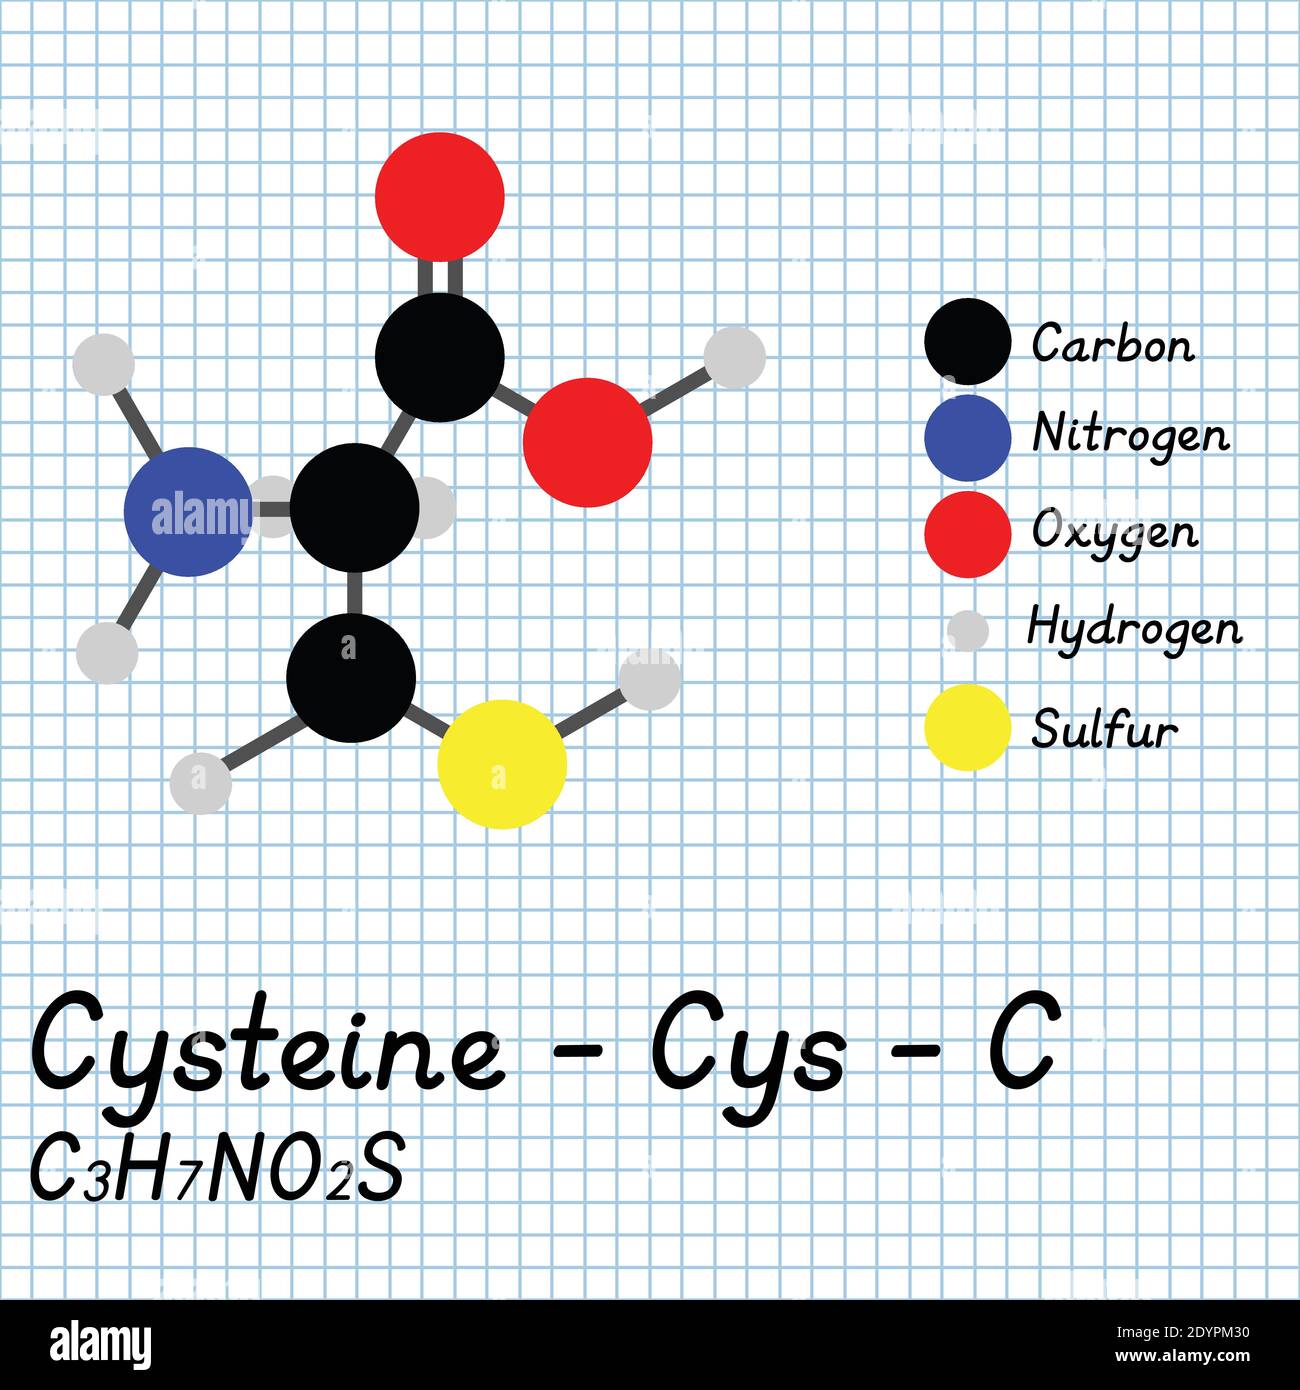 Cysteine - Cys - C Amino Acid molecular formula and chemical structure . 2D Ball and stick model on school paper sheet background. EPS10 Stock Vector